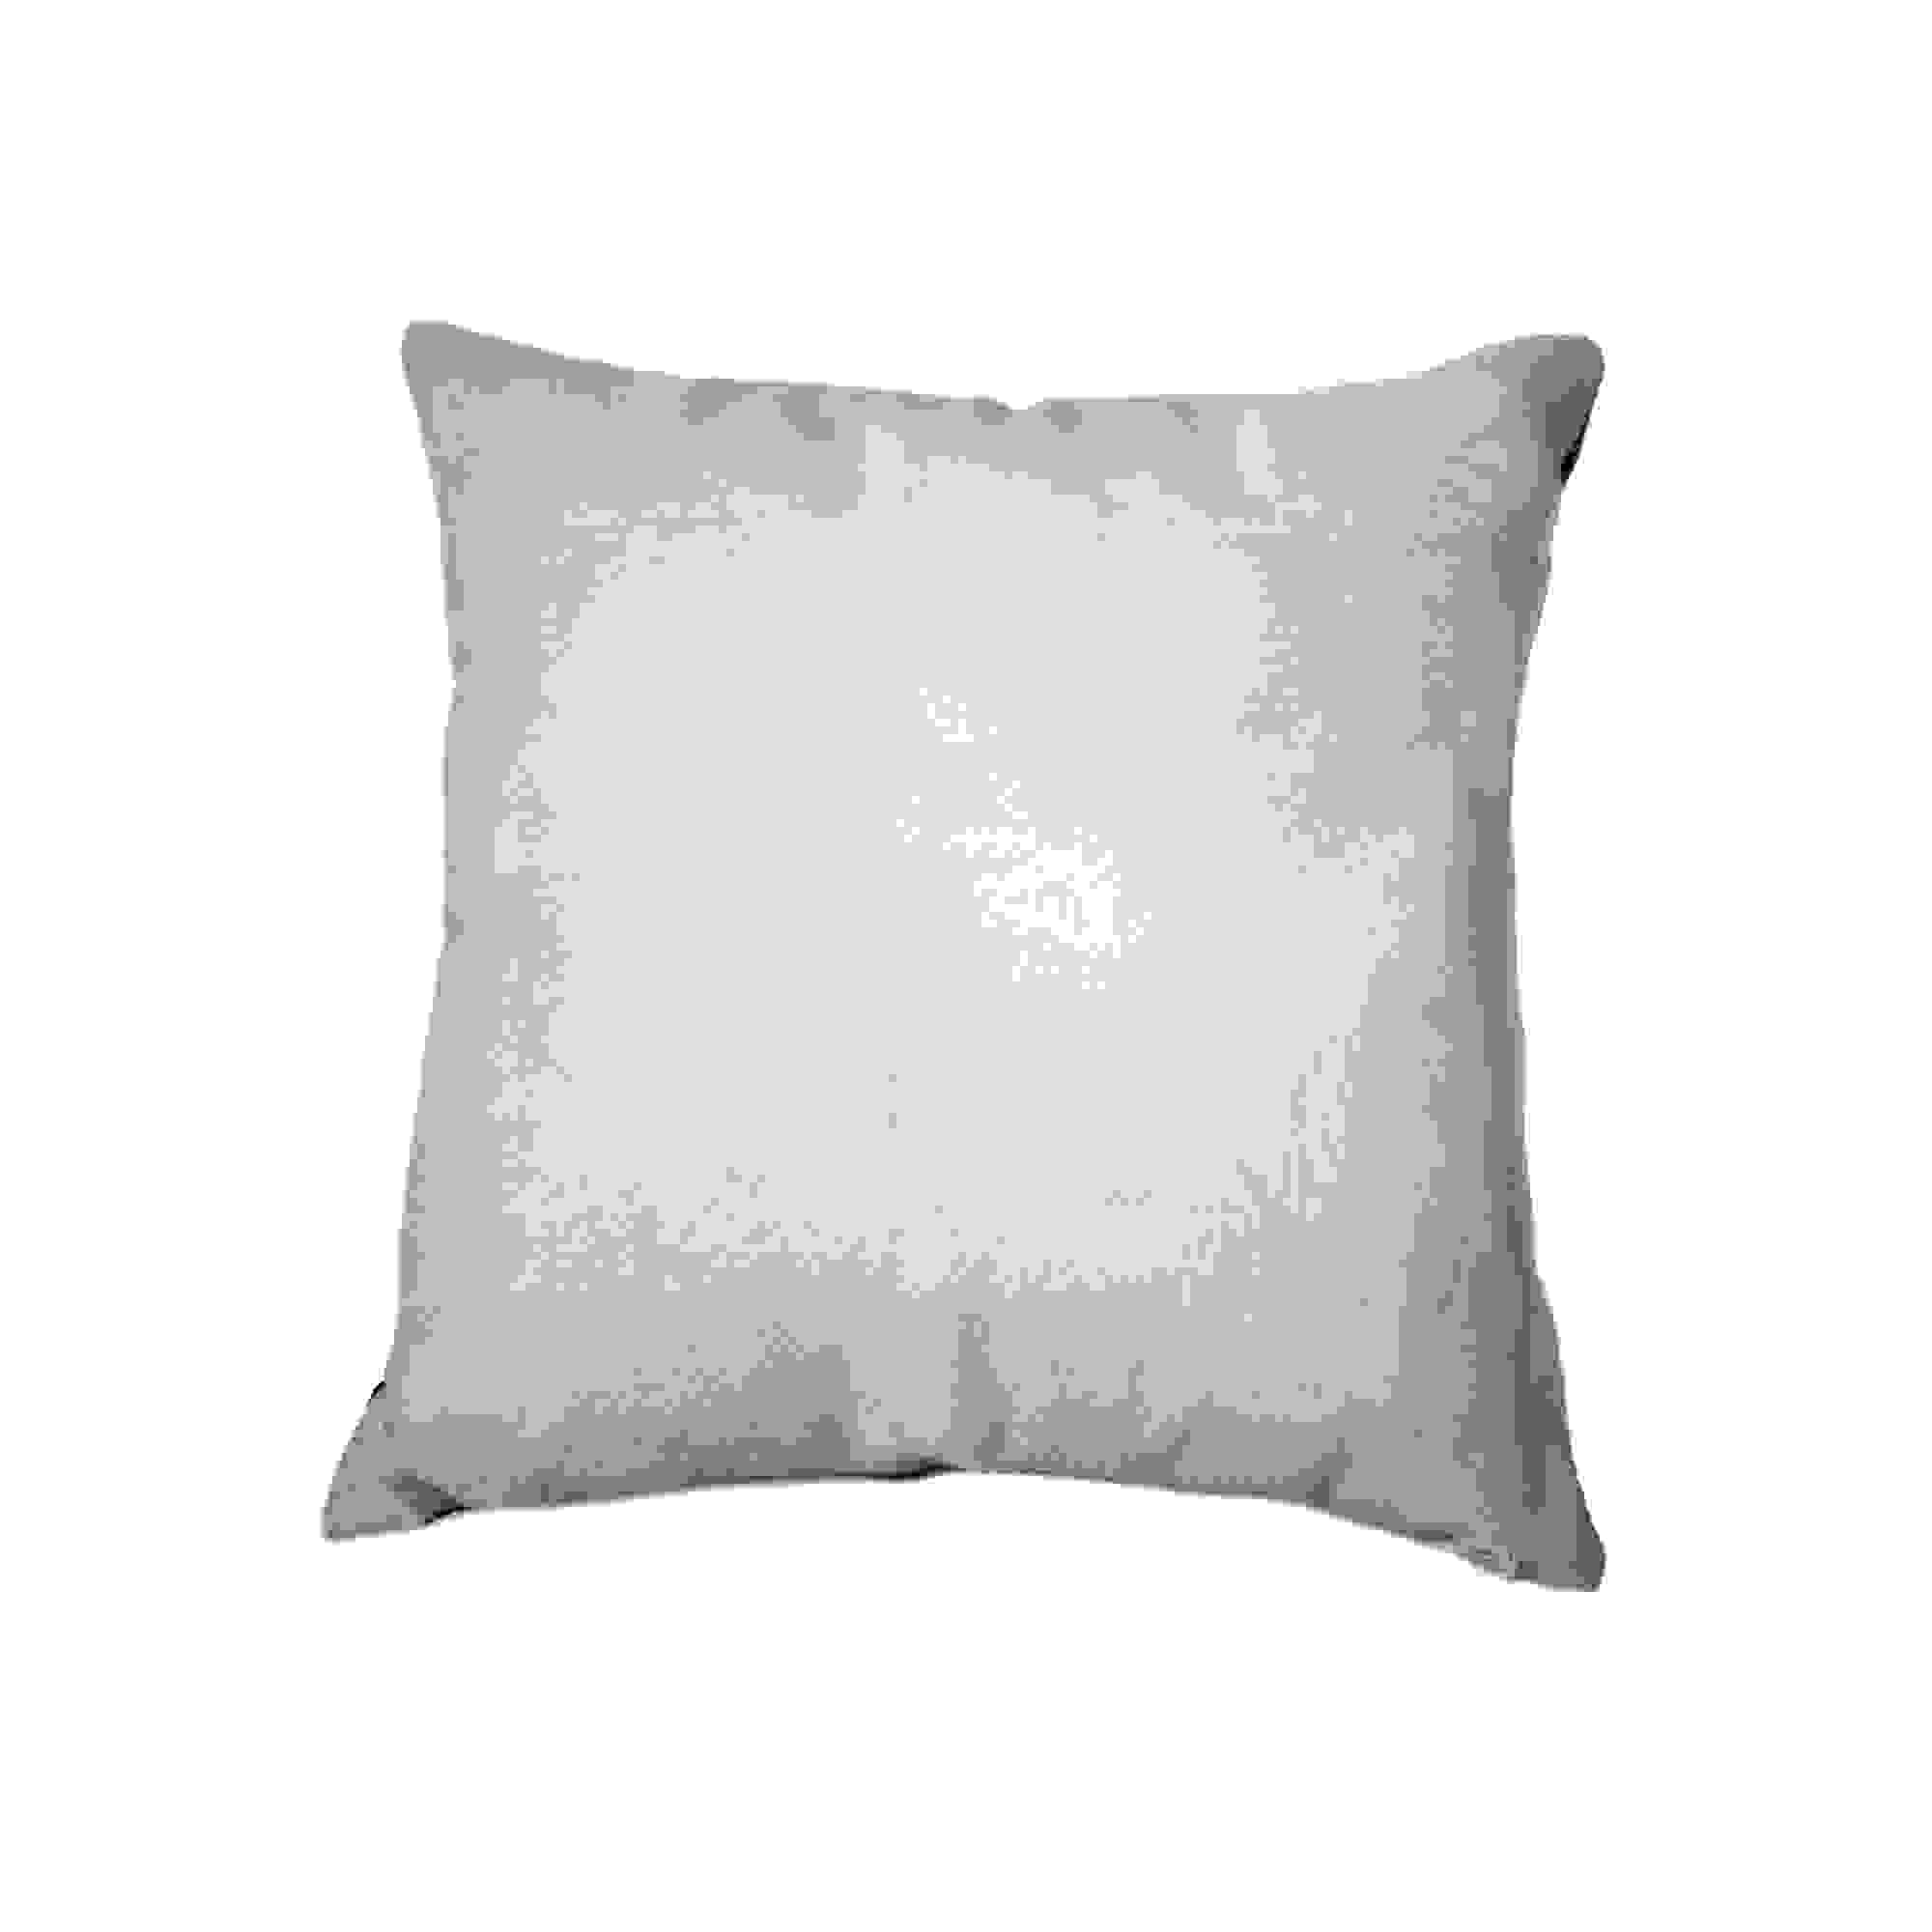 18" x 18" x 5" Off White Cowhide - Pillow